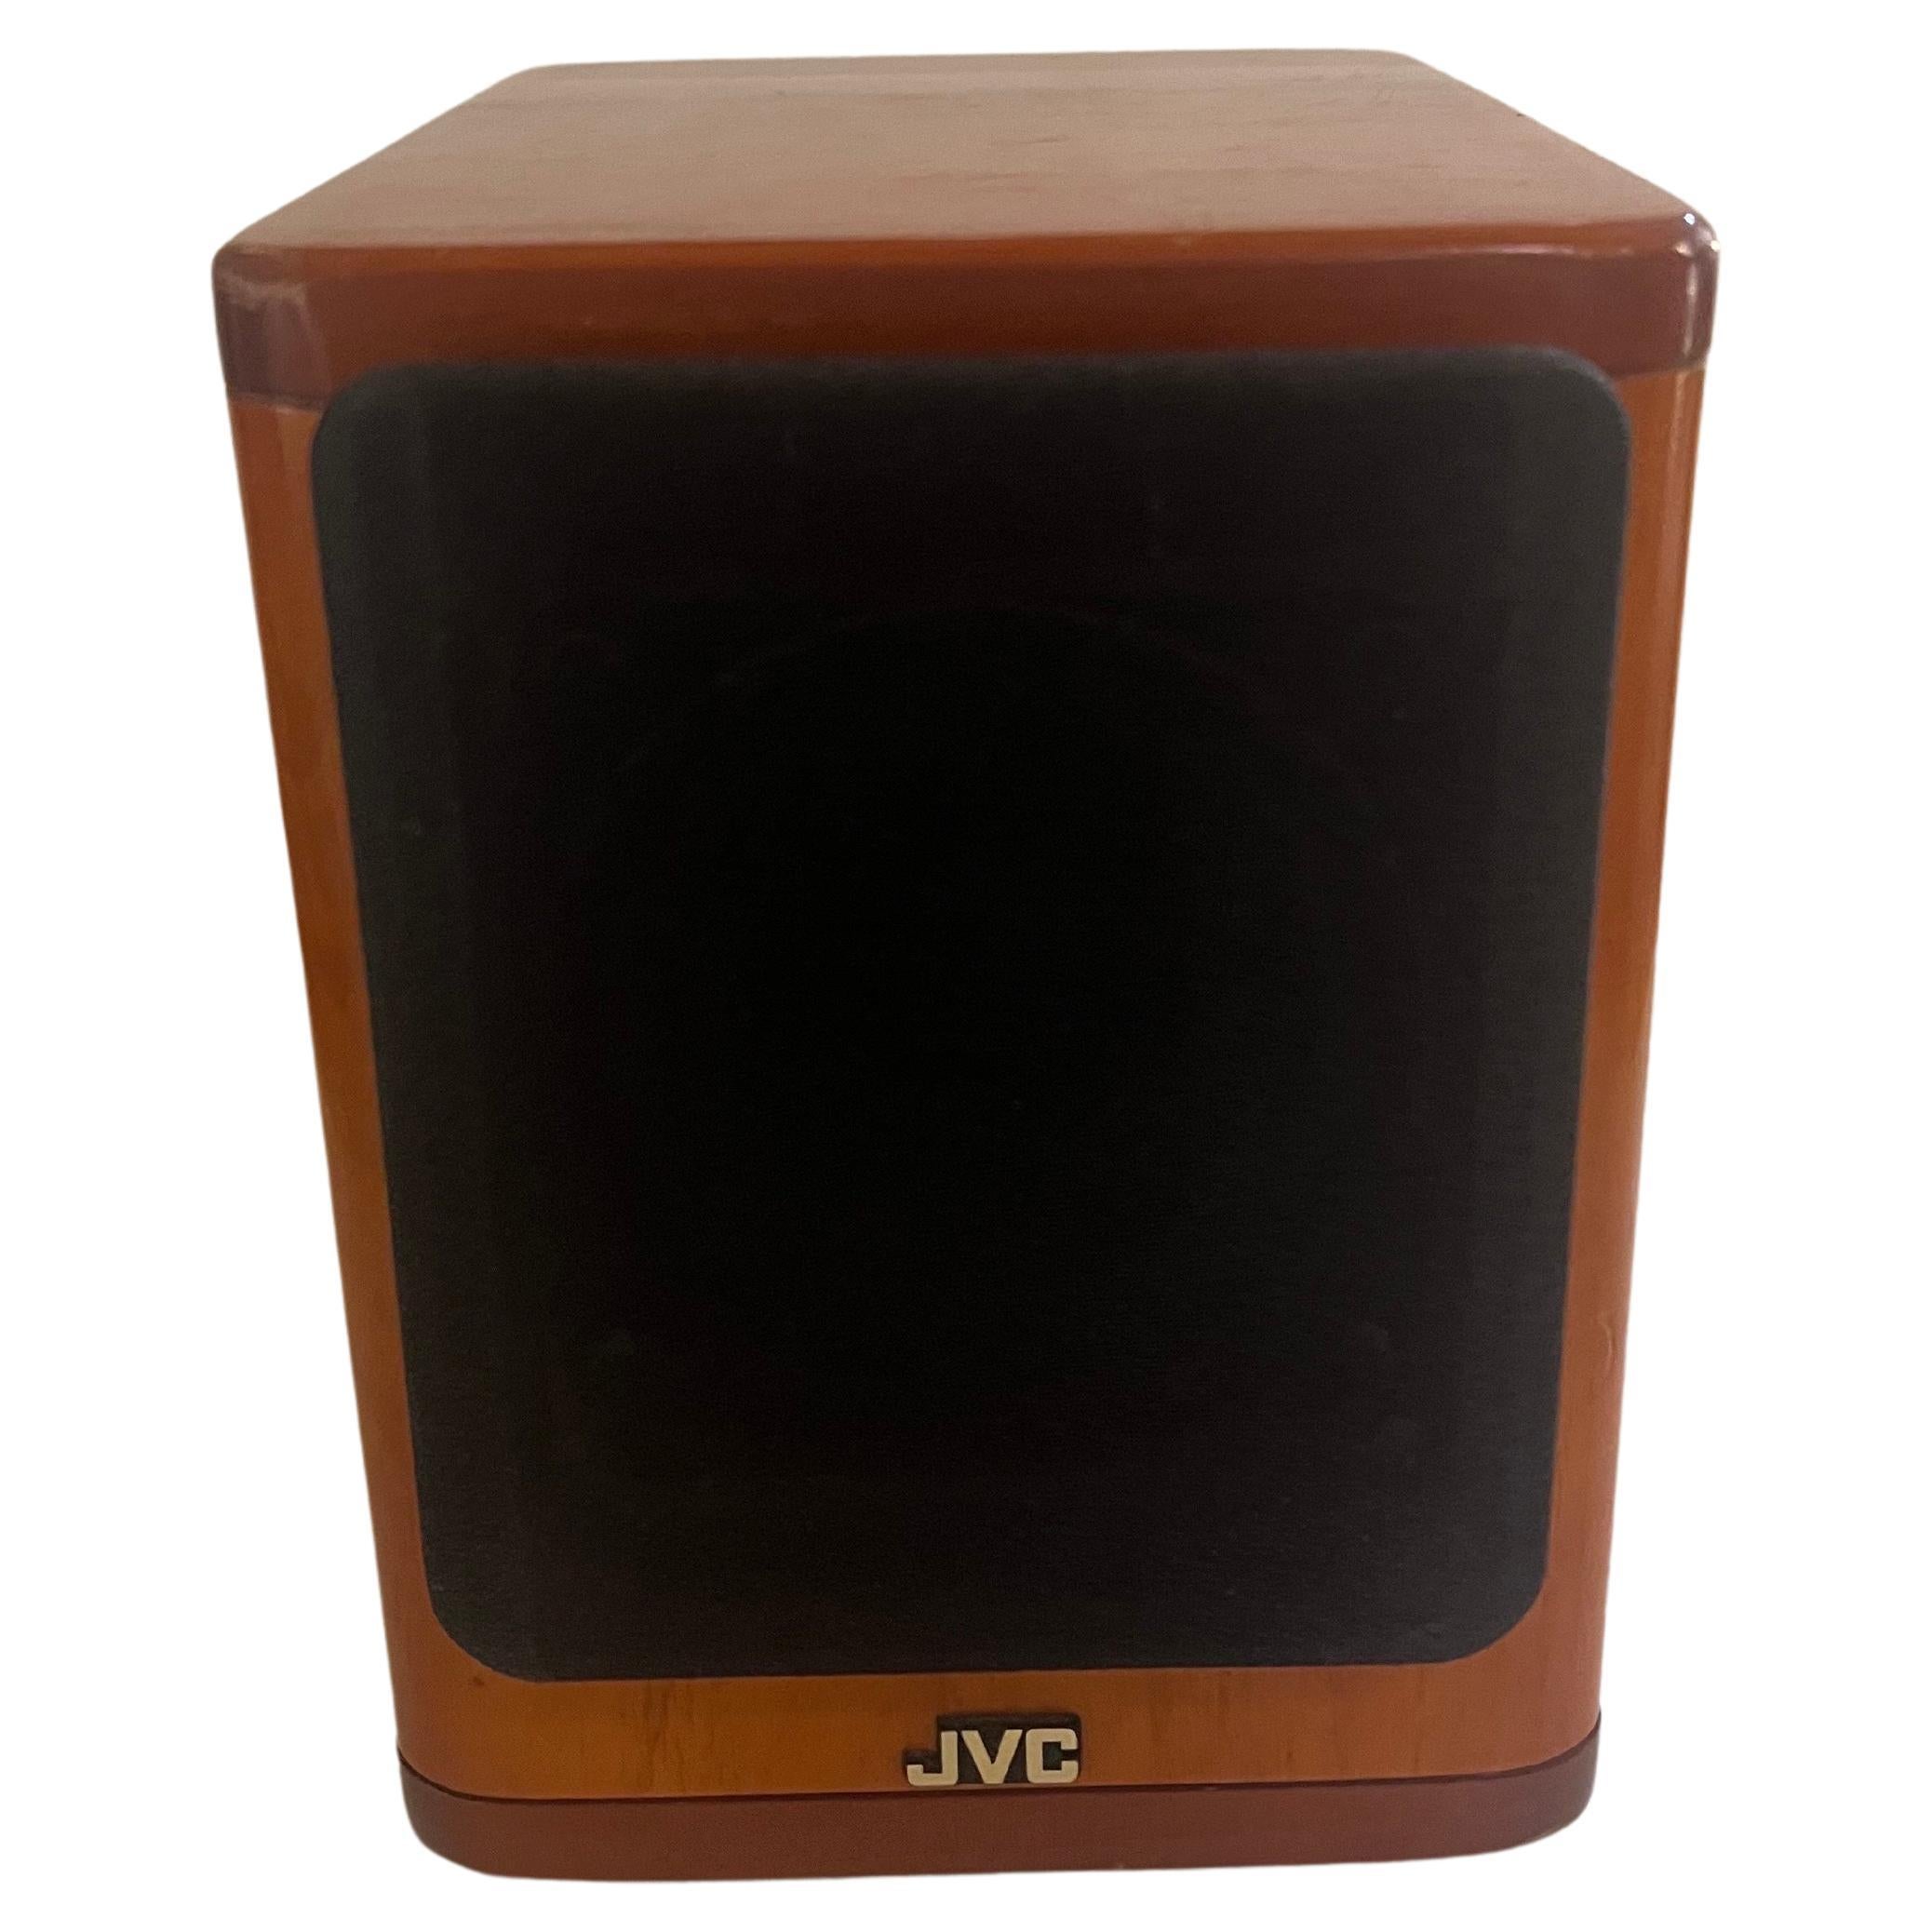 Japanese Pair of Post Modern Solid Cherry & Mahogany Small JVC Bookcase Speaker Japan